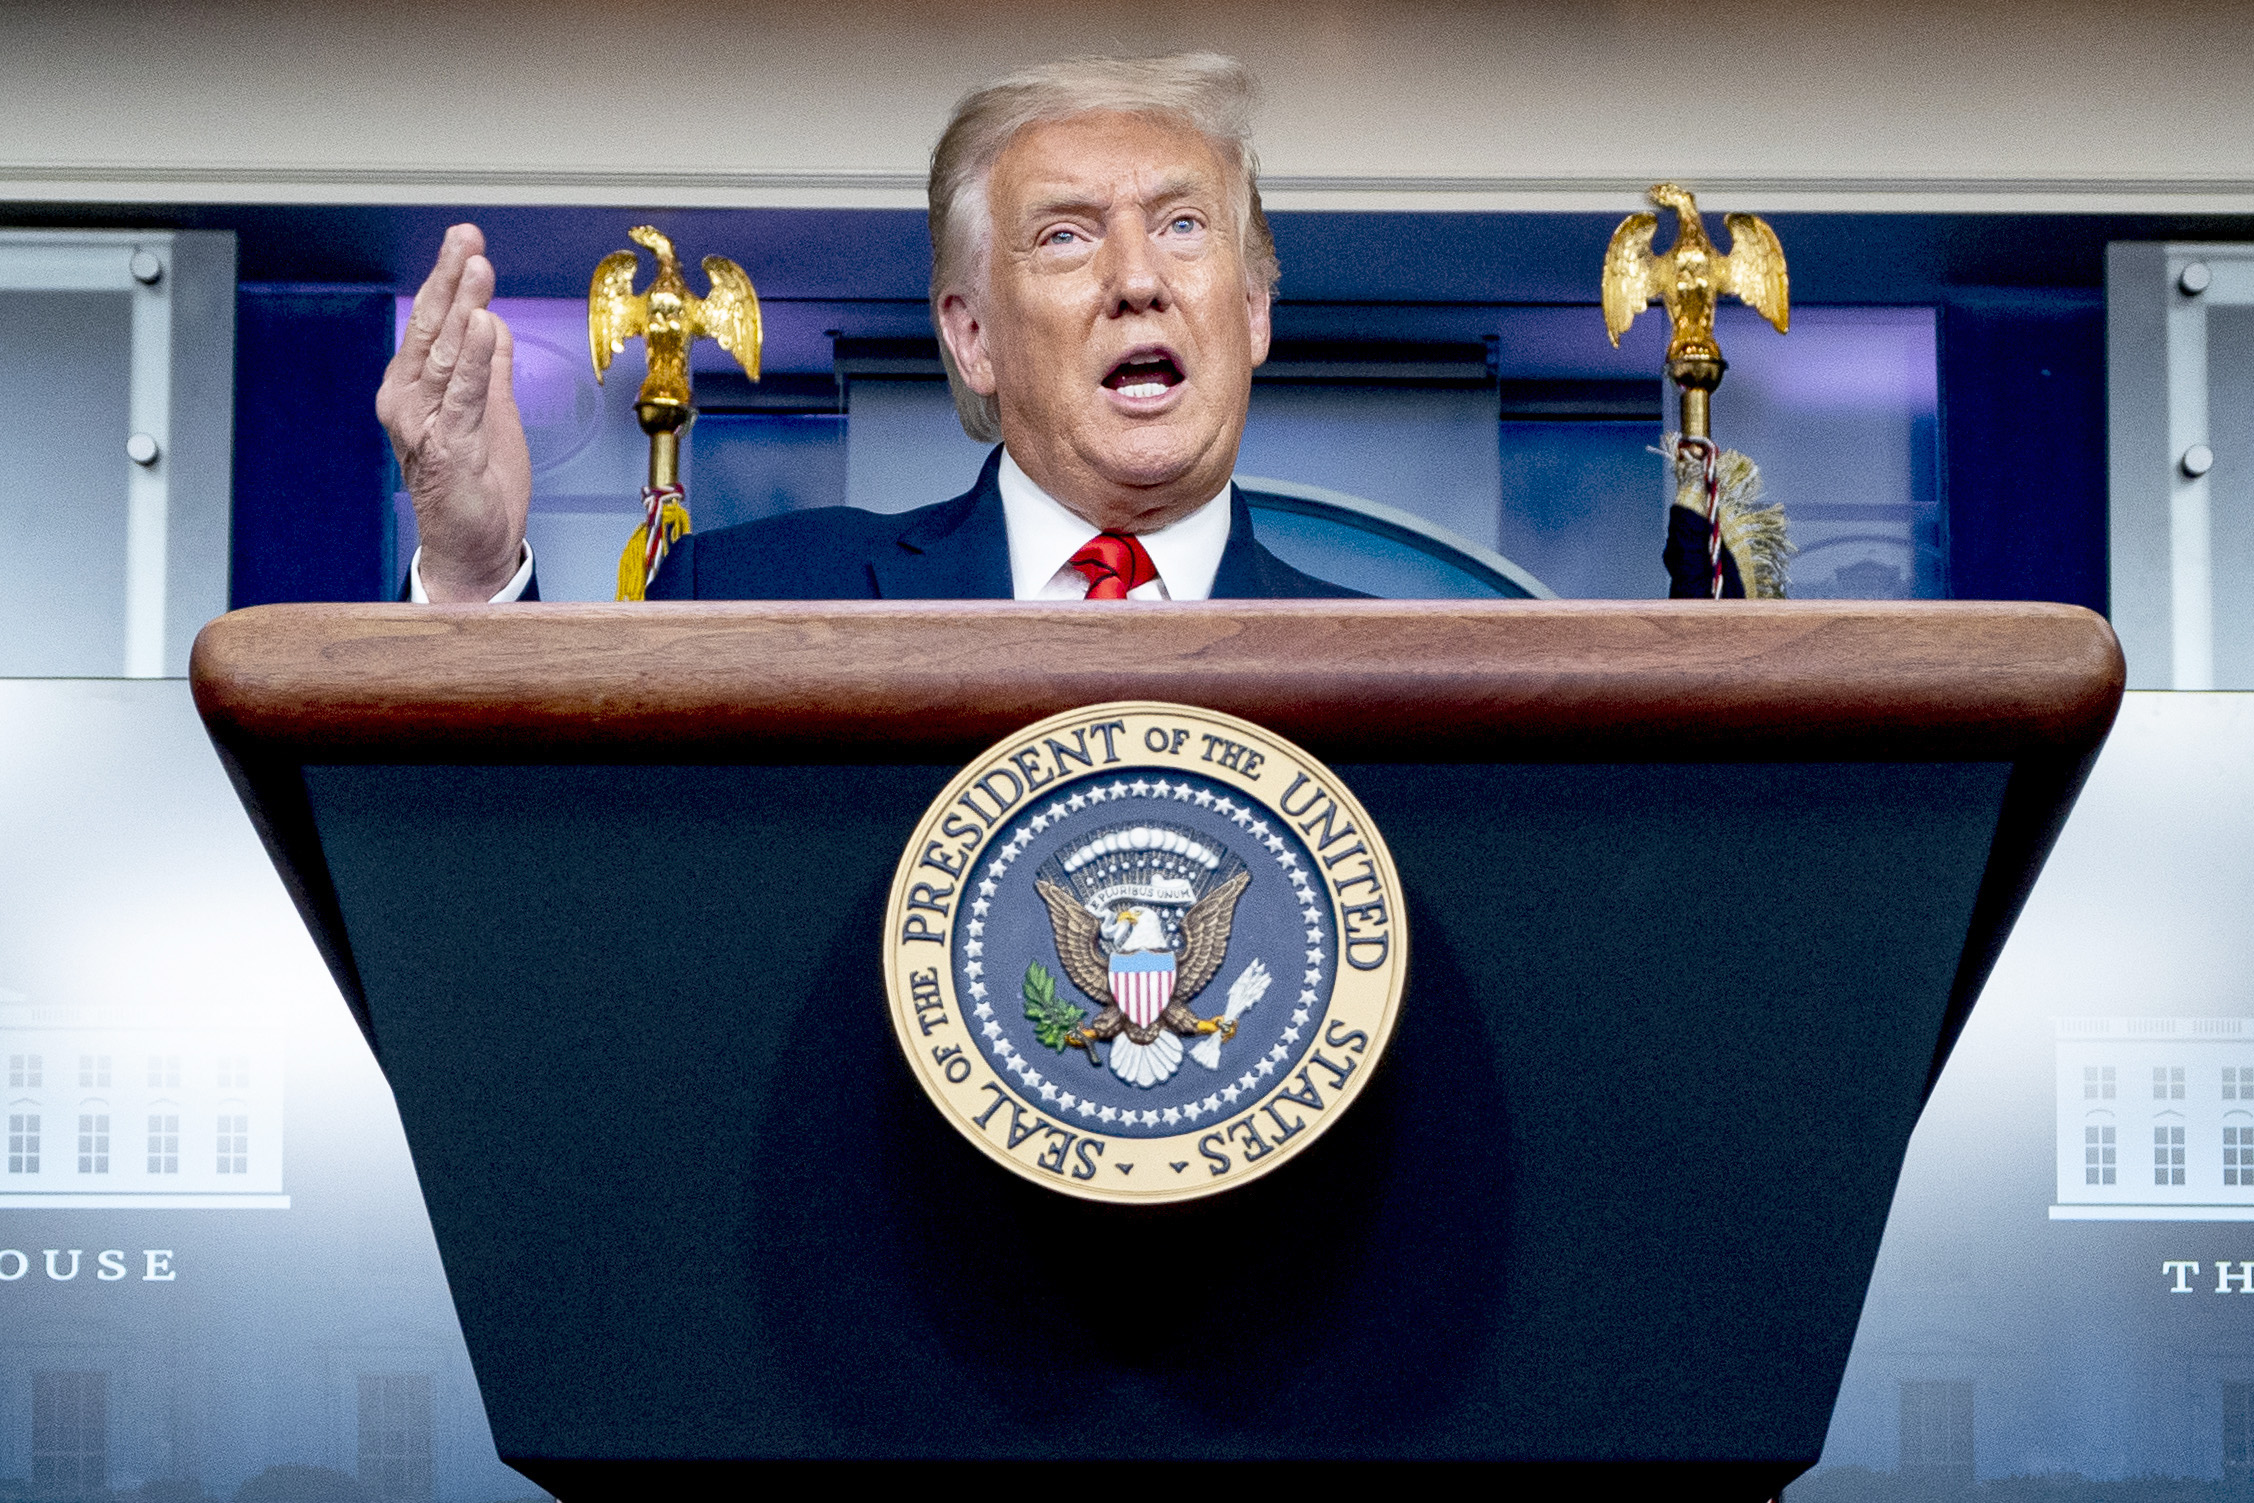 PHOTO: President Donald Trump speaks during a news conference in the James Brady Press Briefing Room at the White House, Aug. 31, 2020.